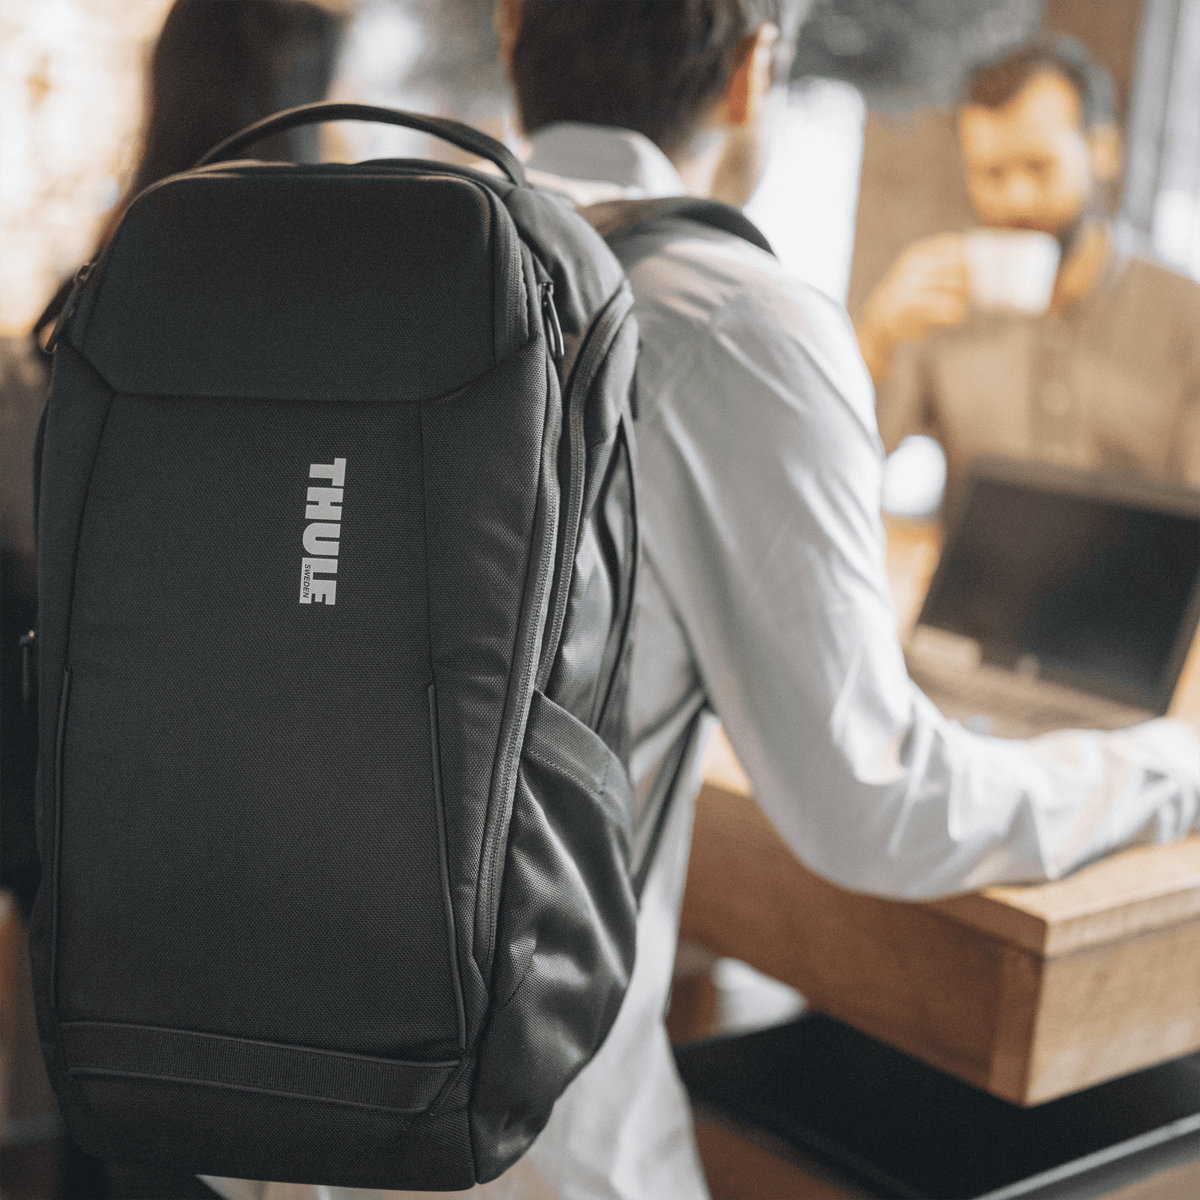 A person sits at a cafe table with a laptop and a black Thule Accent backpack.